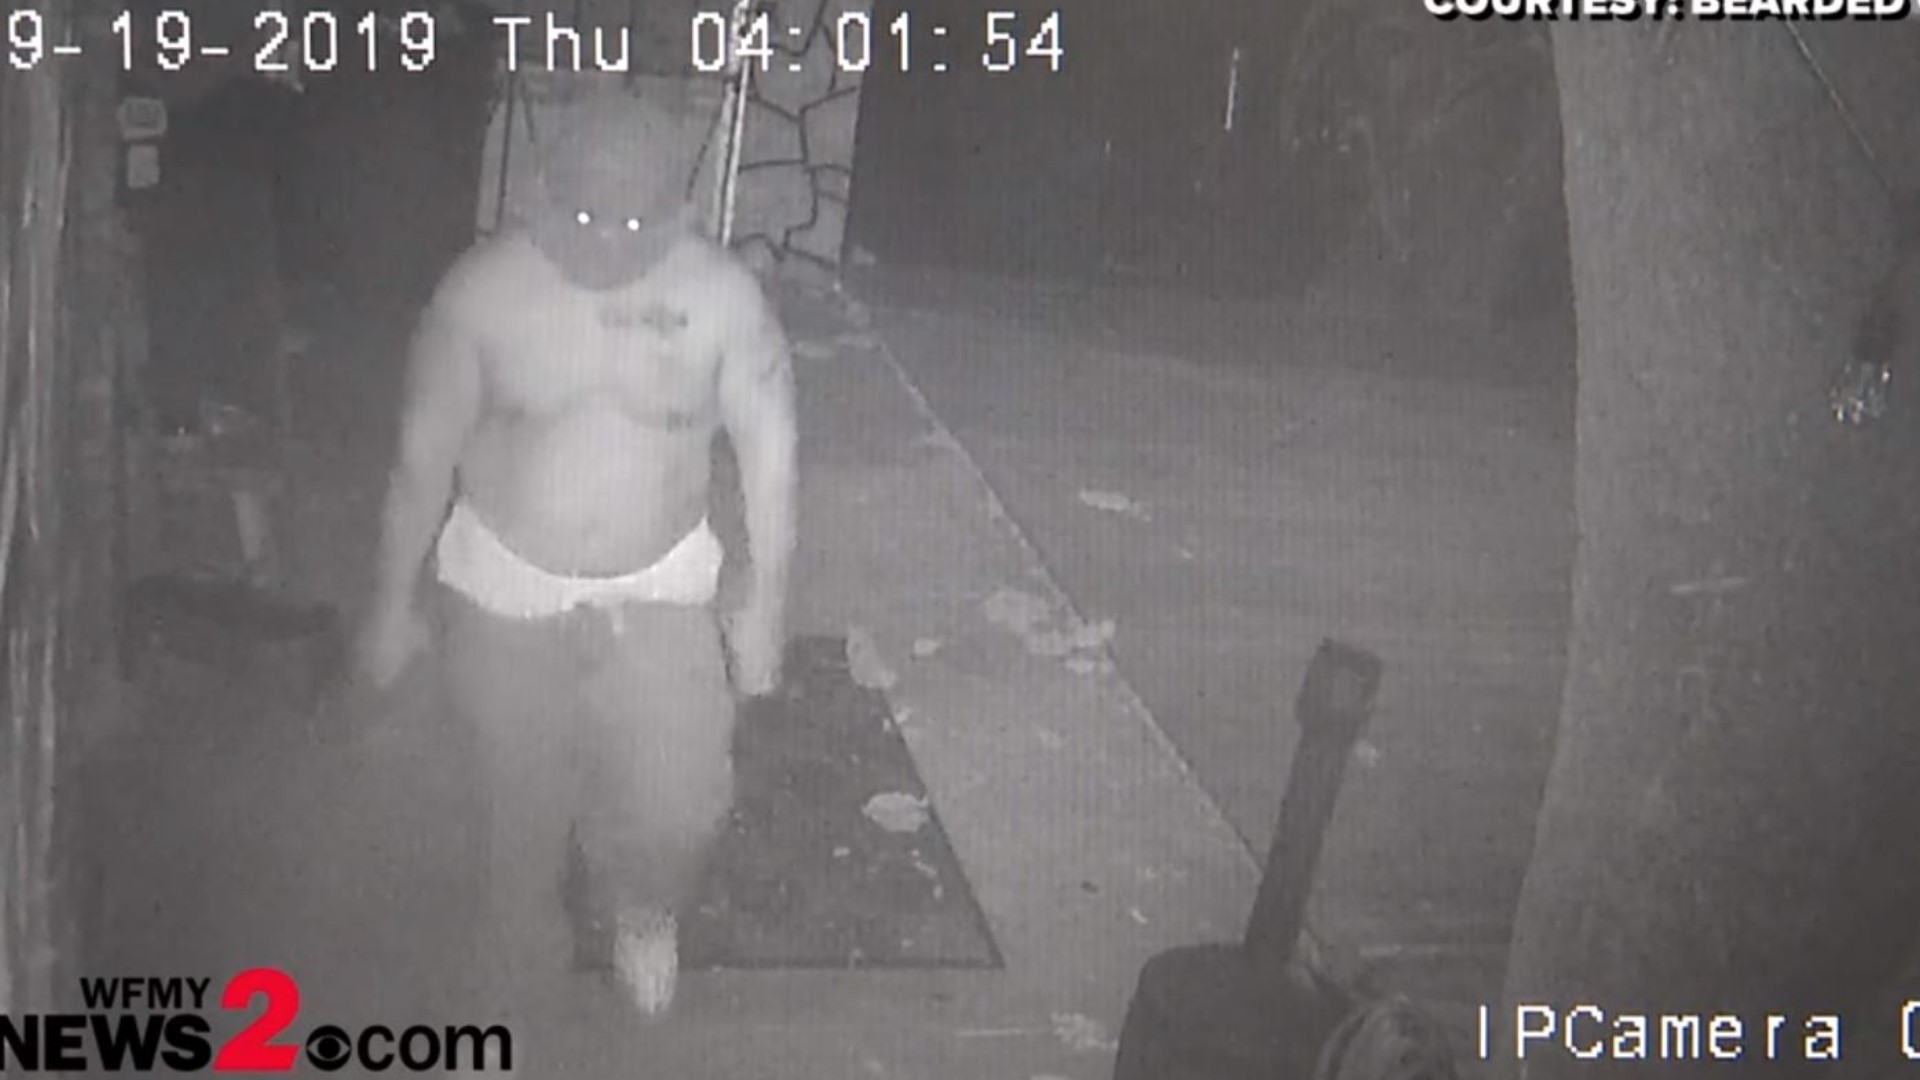 Surveillance video caught him breaking into the Bearded Goat bar in downtown Greensboro.